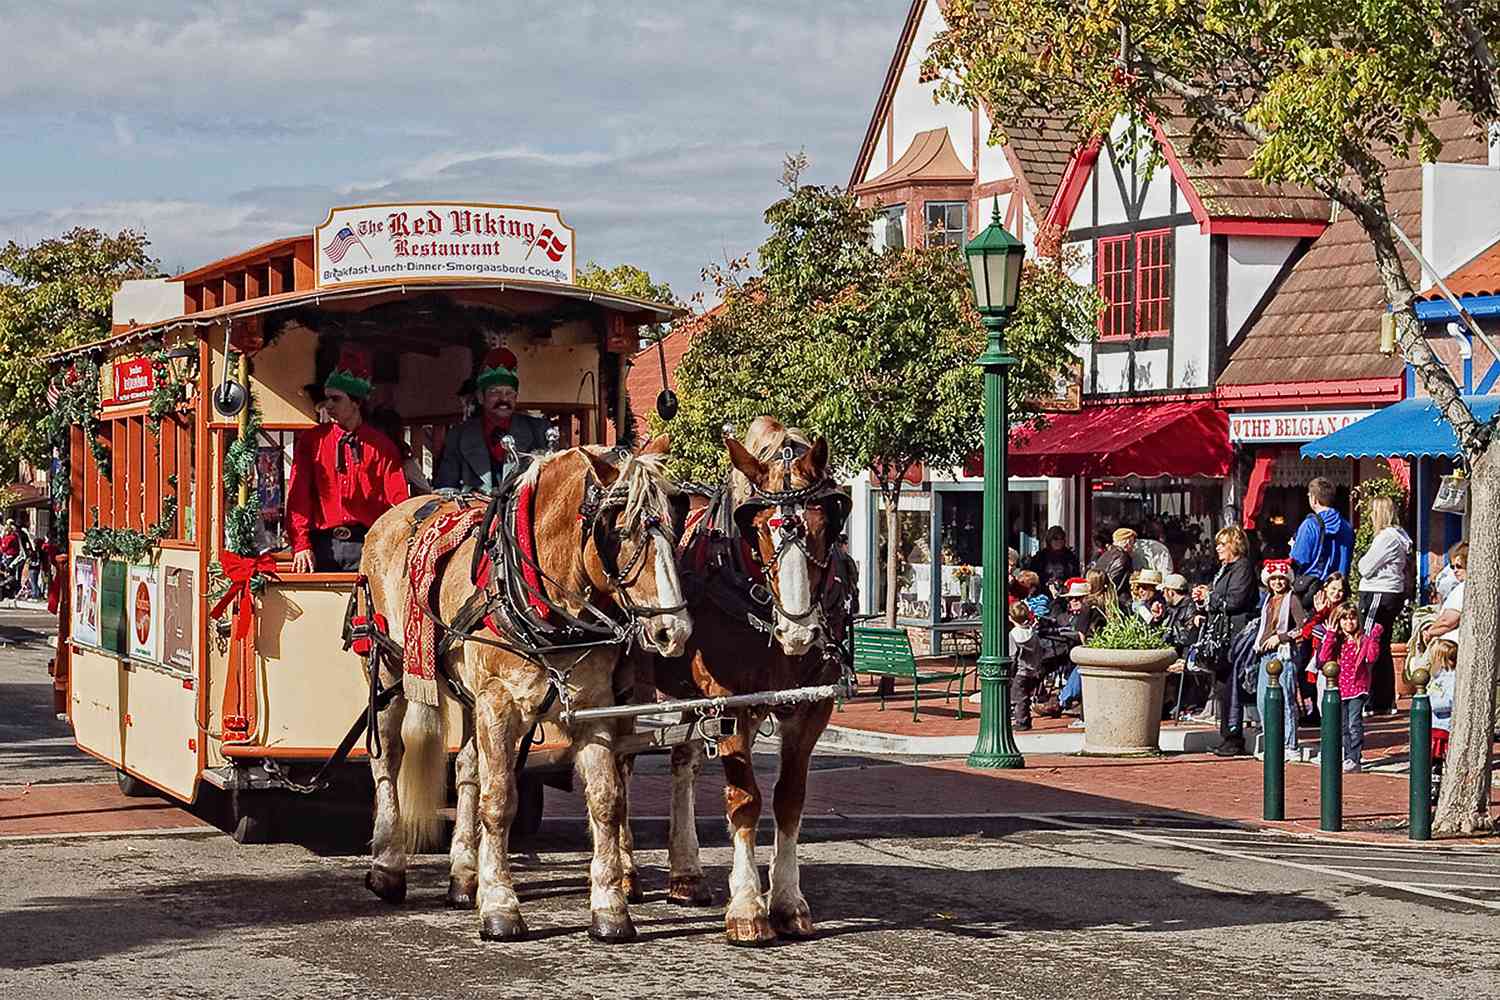 Solvang Transforms Into a Magical Holiday Town With European-style Christmas Markets, Festive Events, and Dazzling Decor